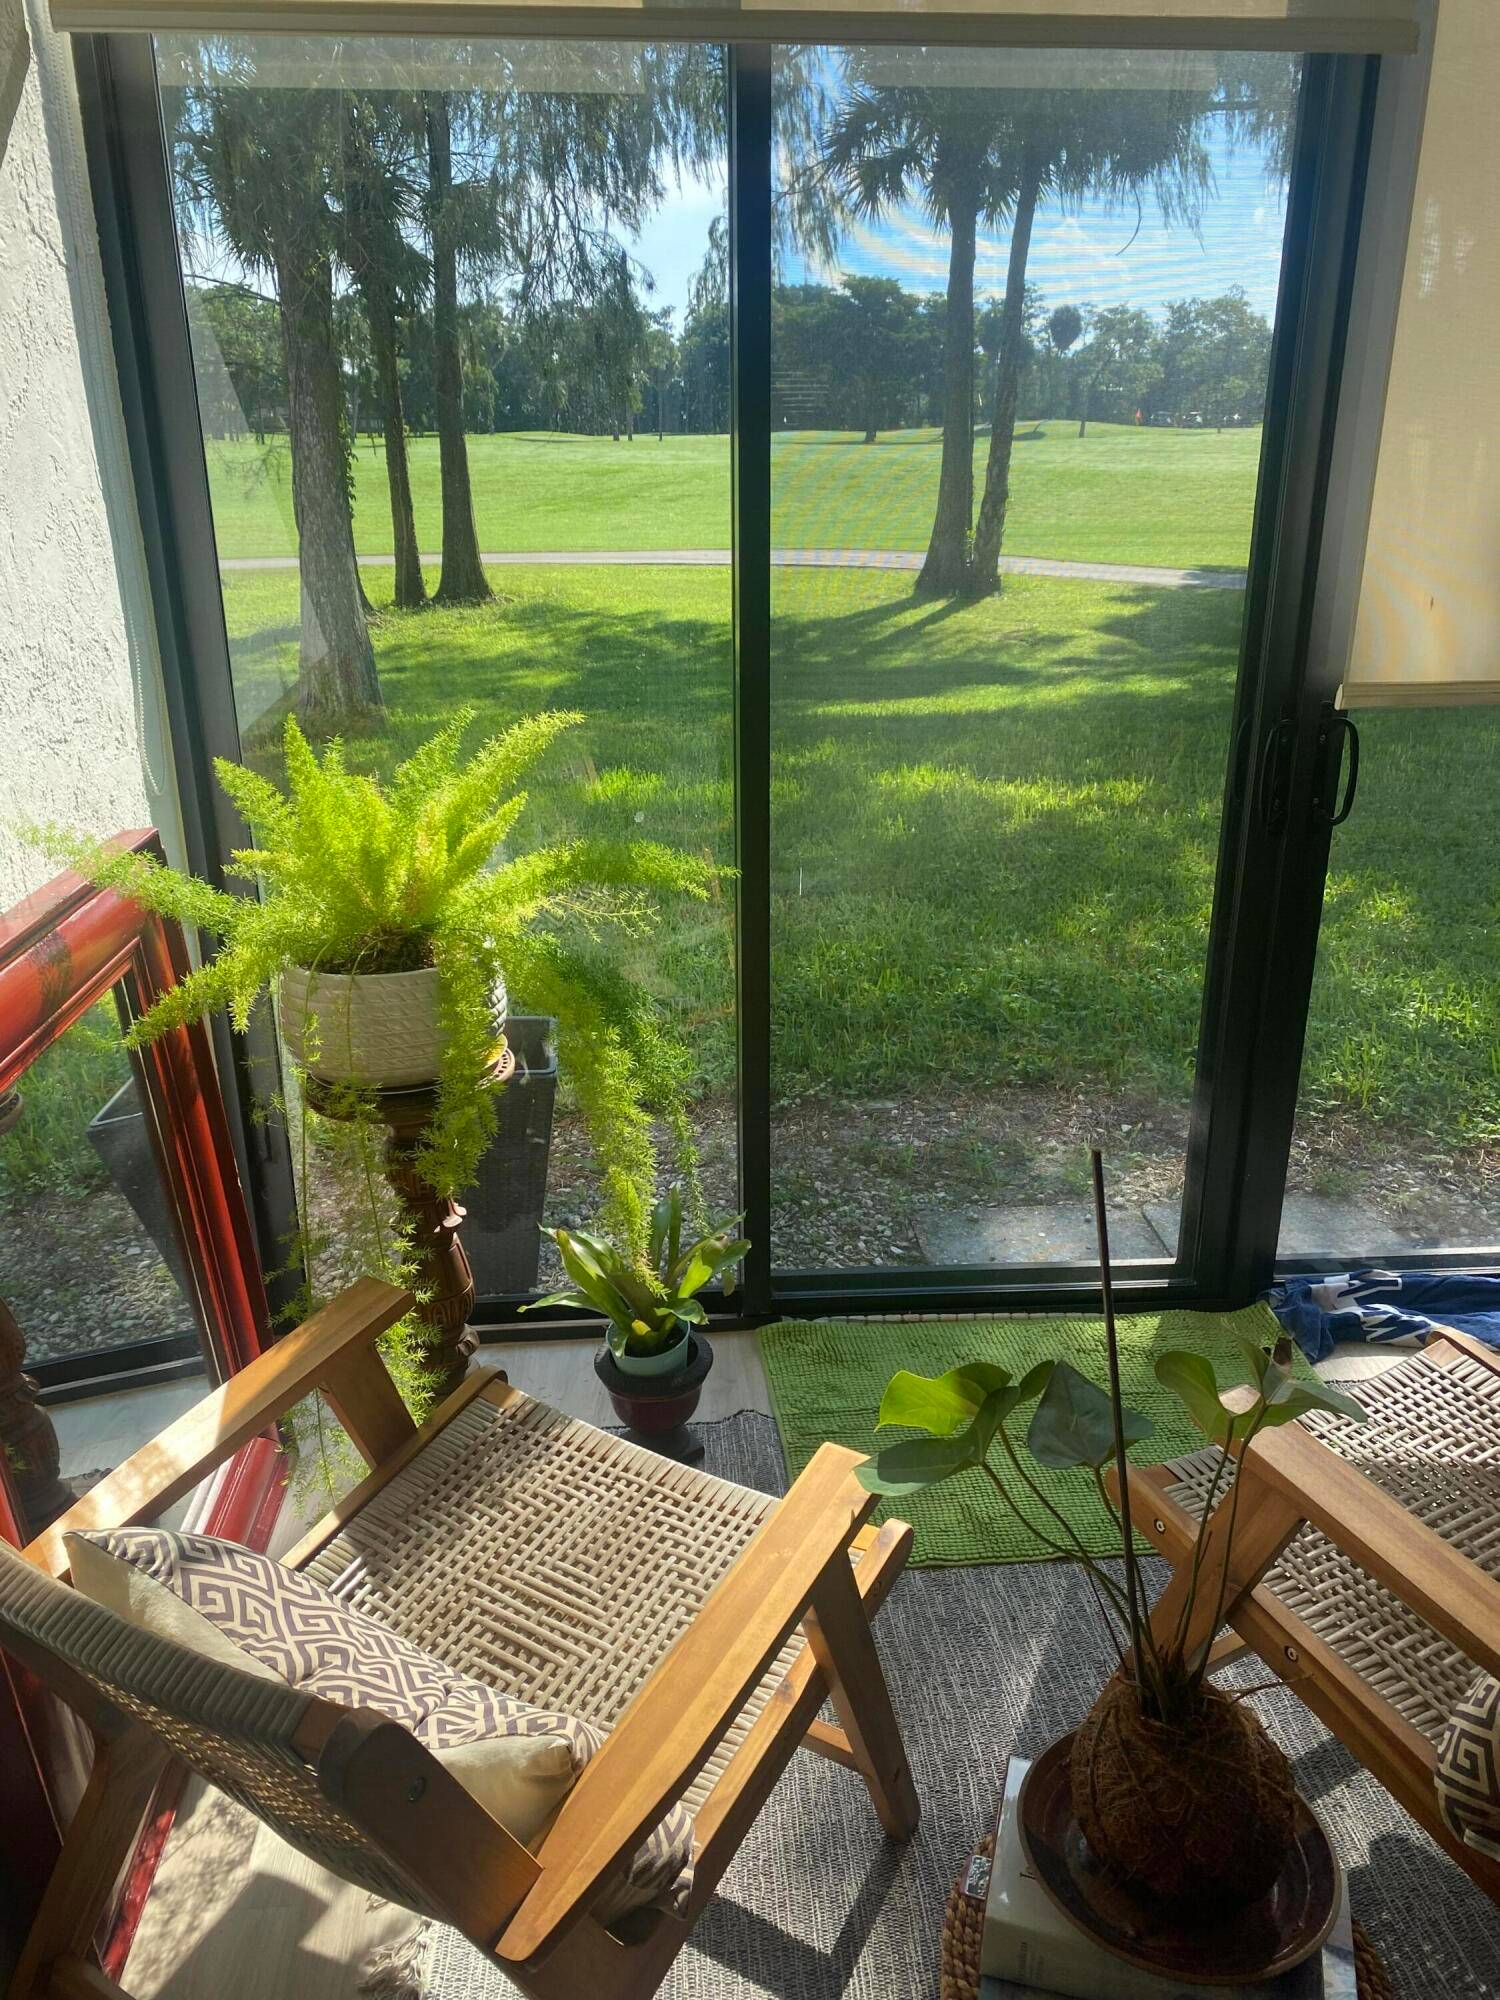 THIS IS A GREAT UNIT WITH SPECTACULAR GOLF VIEW, LOCATED AT VISTAS BOCA LAGO NEXT TO THE COUNTRY CLUB UNIQUE VIEW OF THE GOLF BY THE PATIO ENJOY THAT VIEW ...